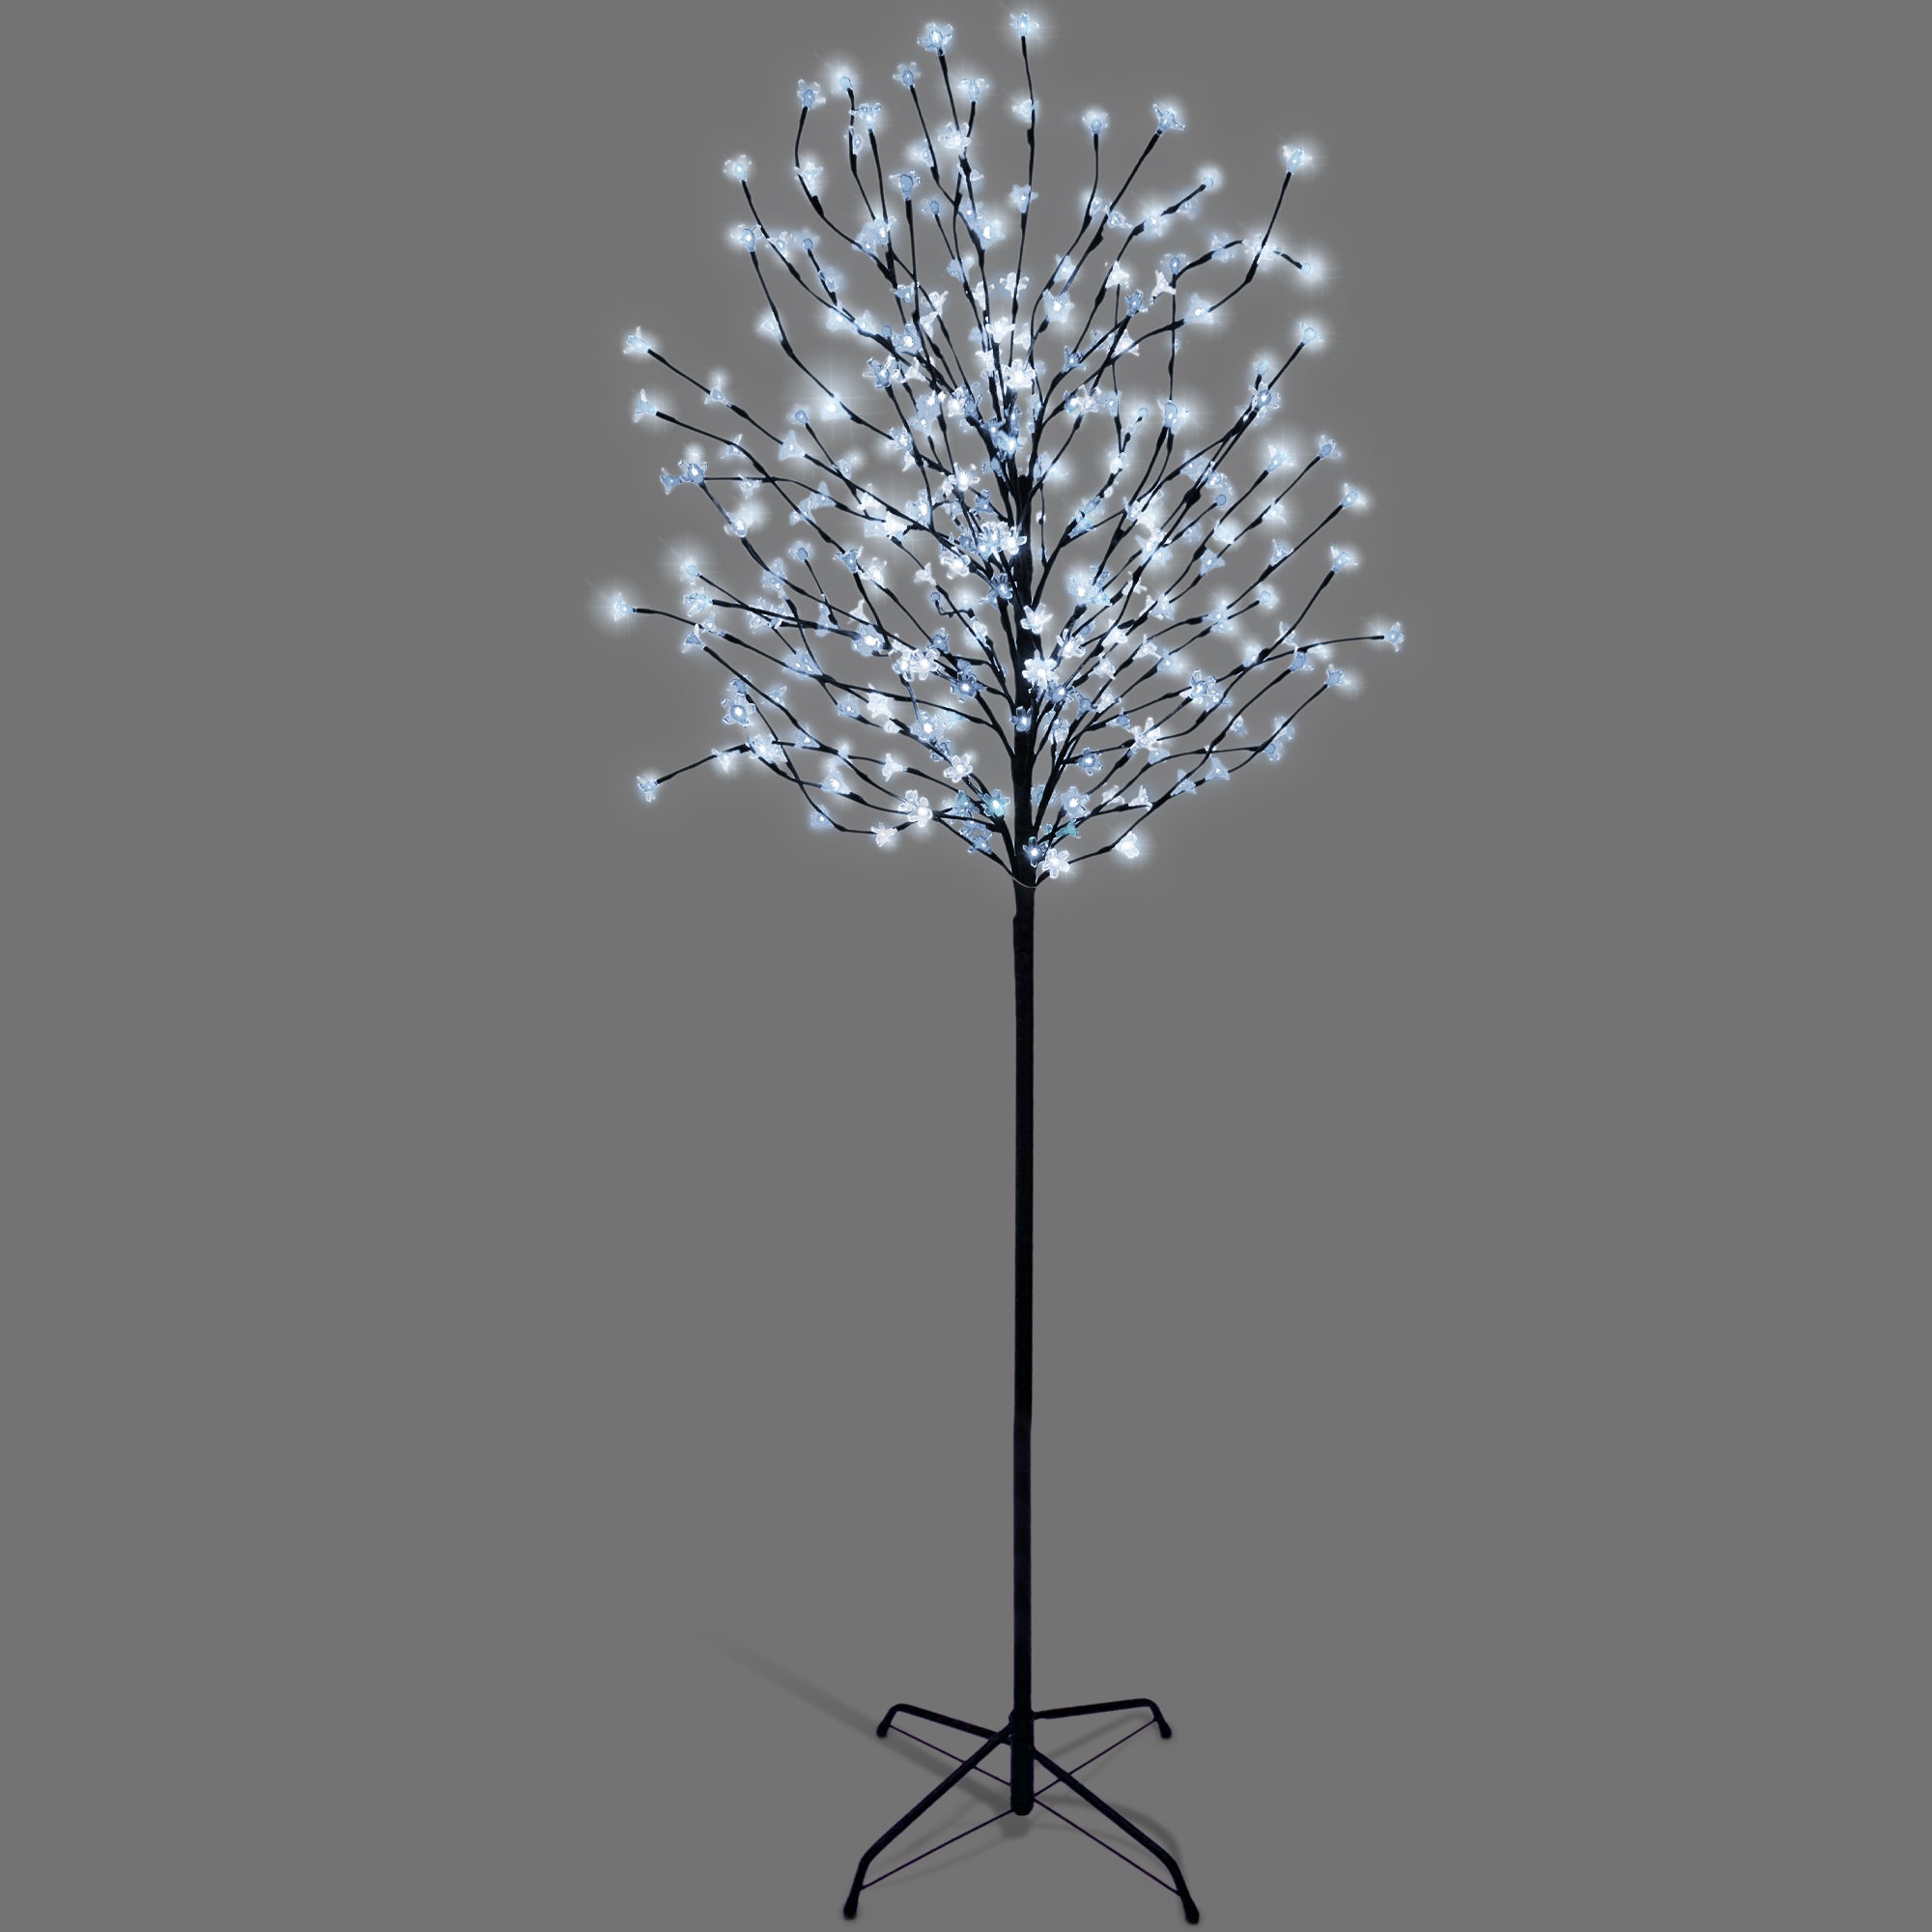 NETTA 6FT LED Cherry Blossom Tree, 300 Pre-Lit Lights, Auto-Off Timer and 8 Lighting Modes, 3M Power Cable, Suitable for Indoor and Outdoor Use - Cool White